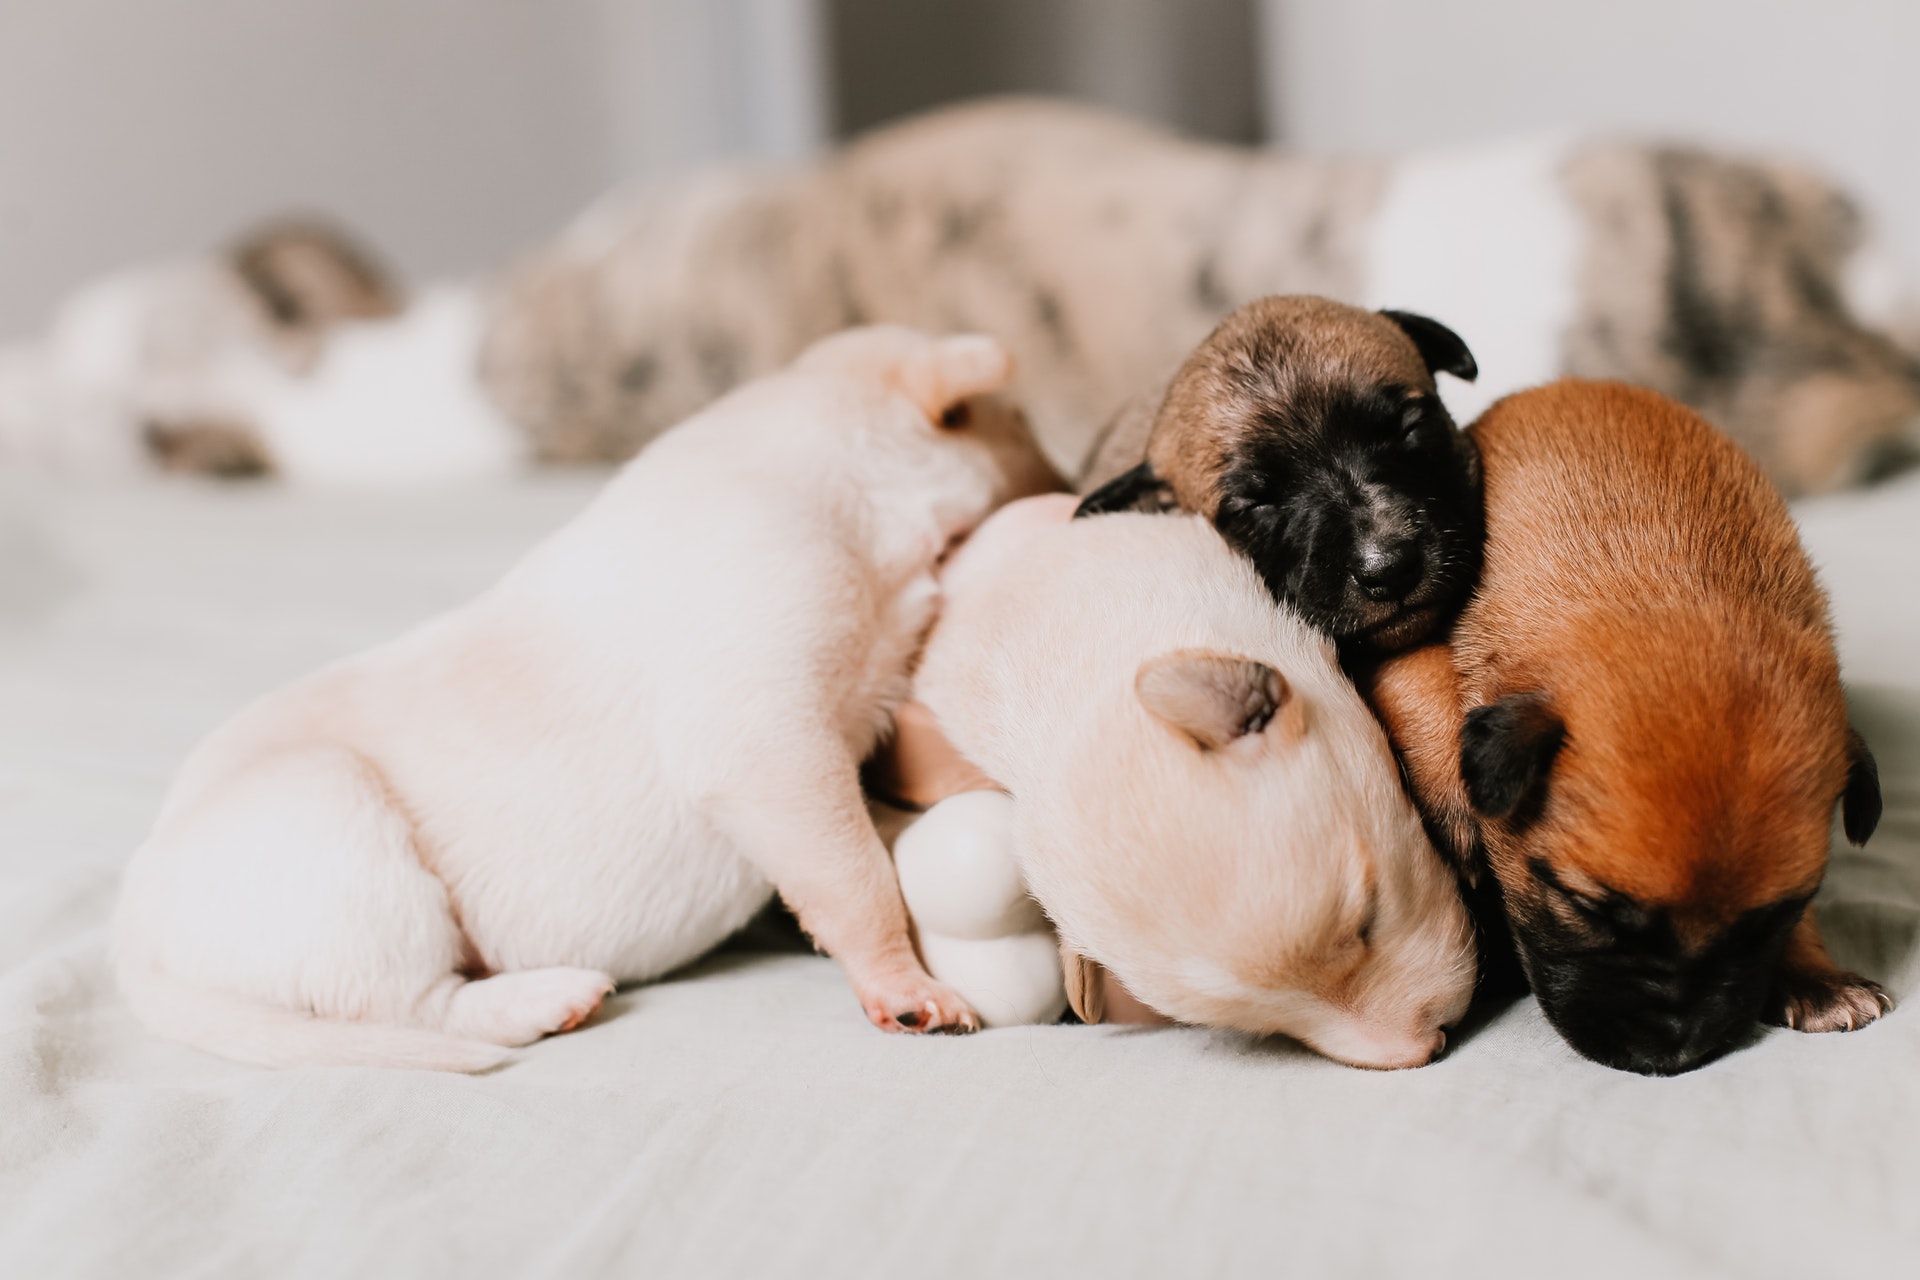 close-up-of-four-puppies-sleeping-tightly-together-3198016.jpg